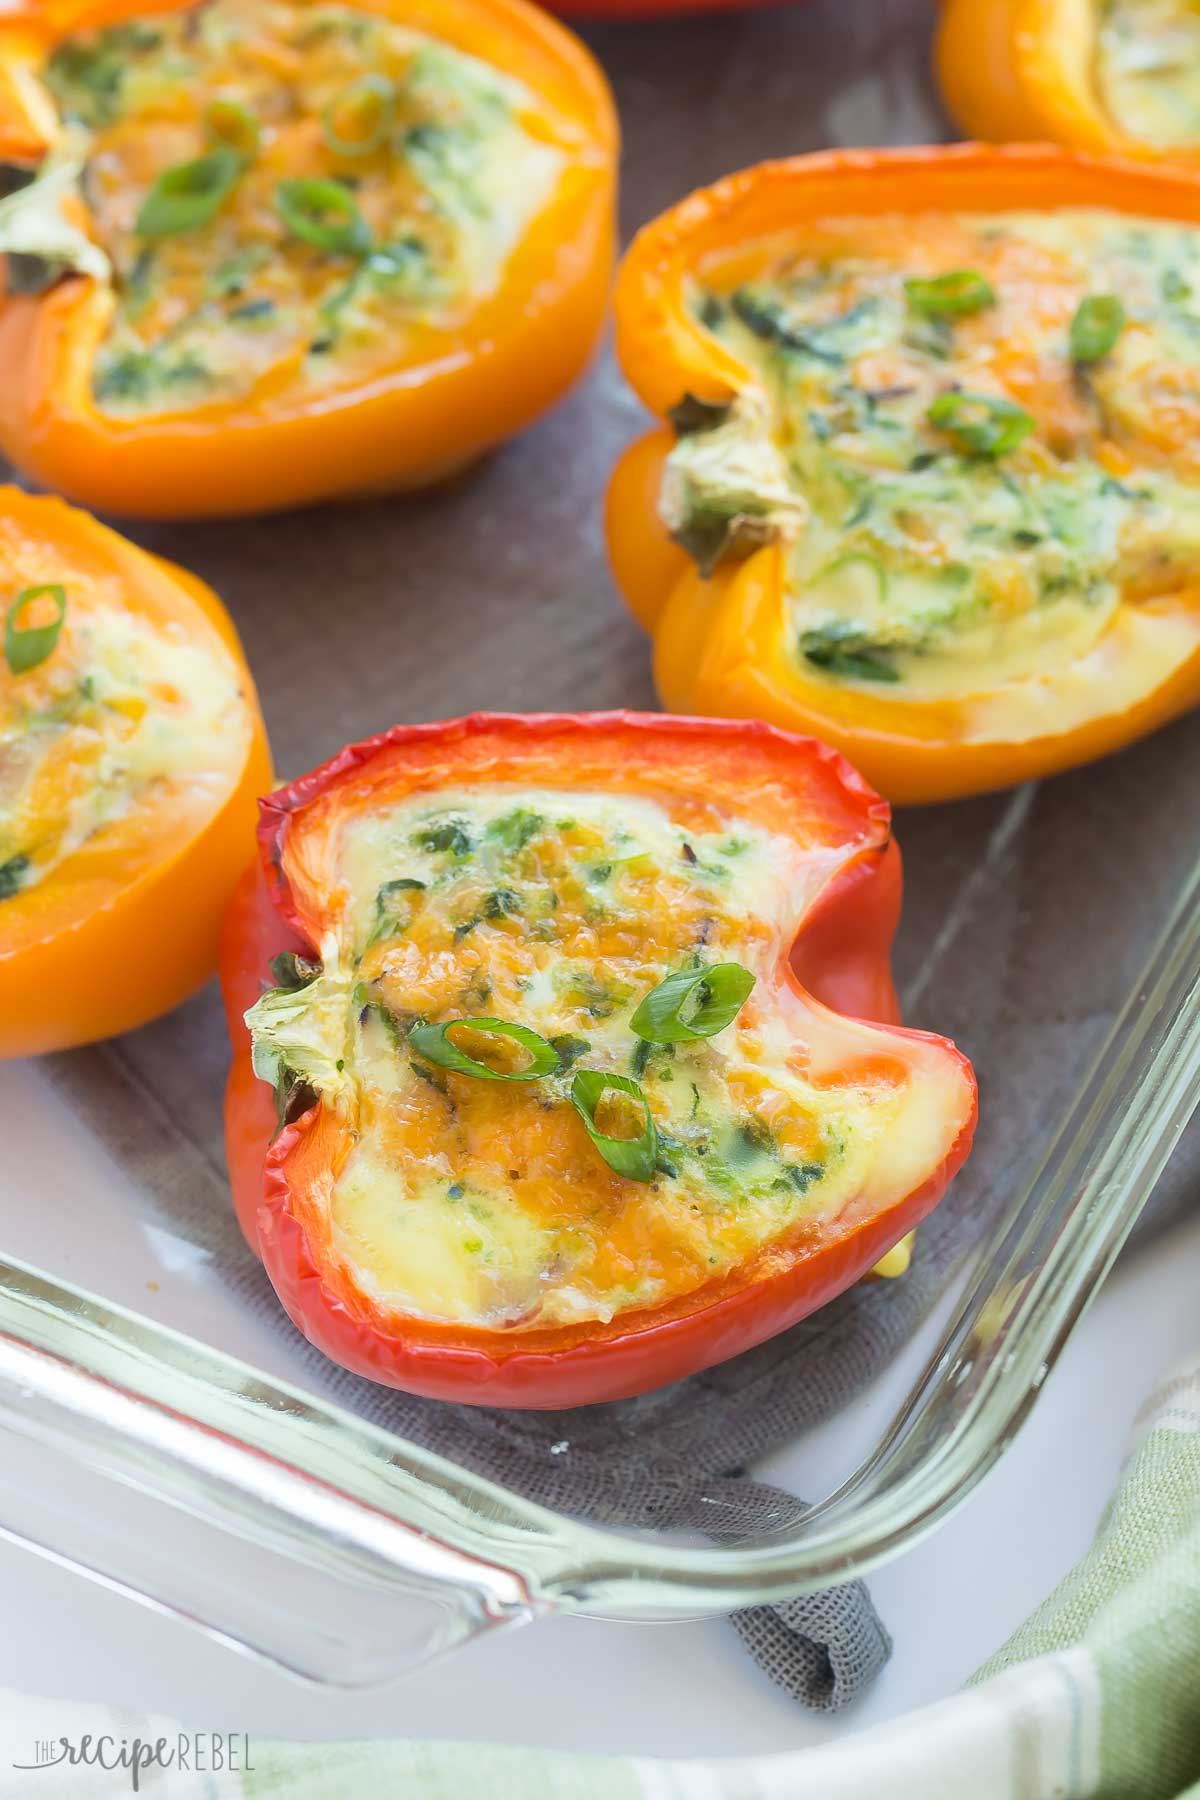 Stuffed peppers oven or. Bacon clipart breakfast time